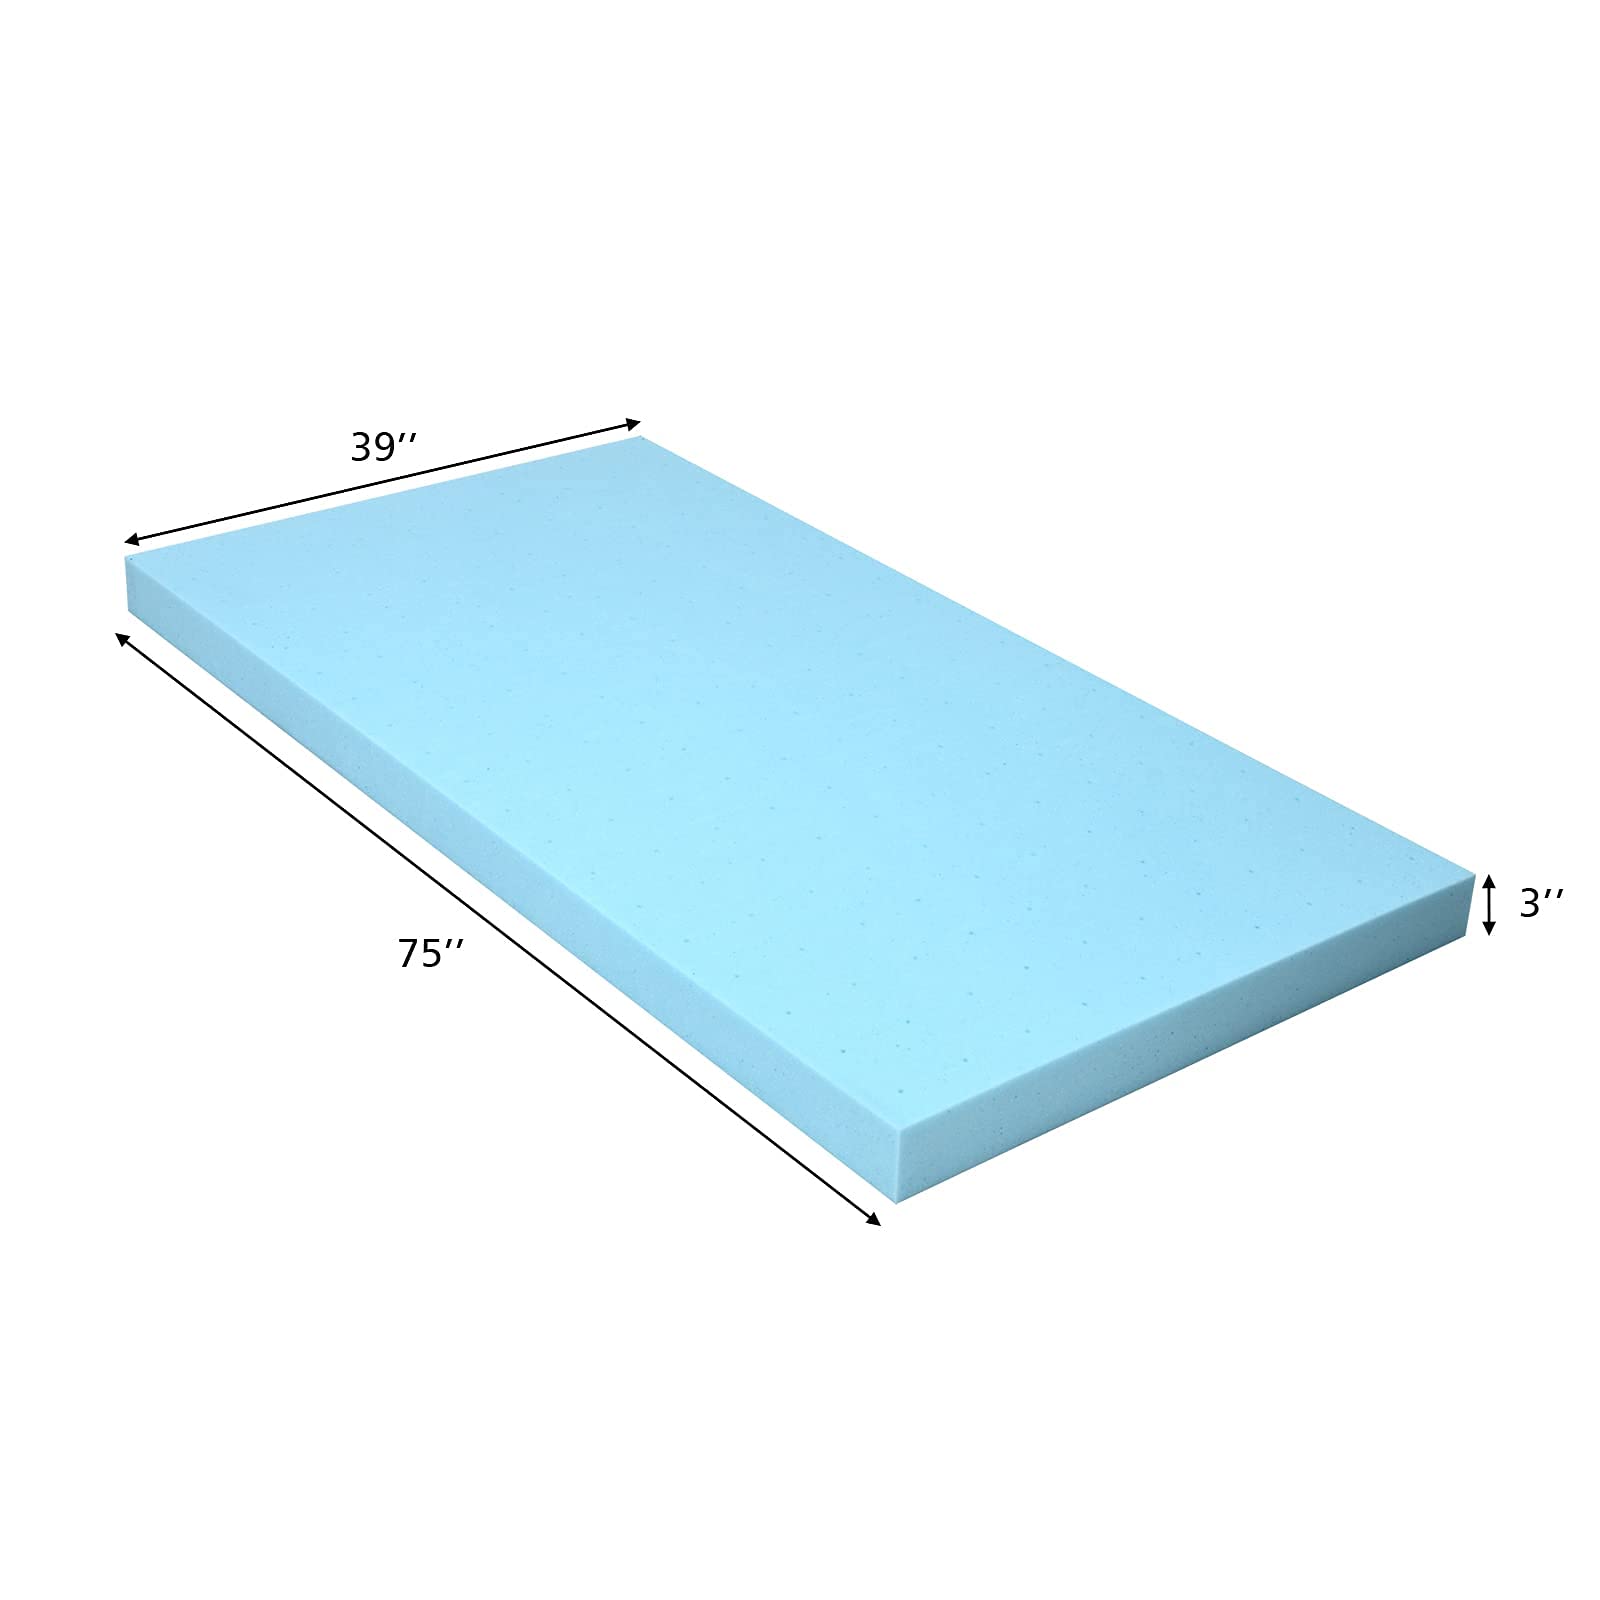 Giantex 3 Inch Memory Foam Mattress Topper, Gel-Infused Cooling Bed Topper with Ventilated Design for Pressure Relieving